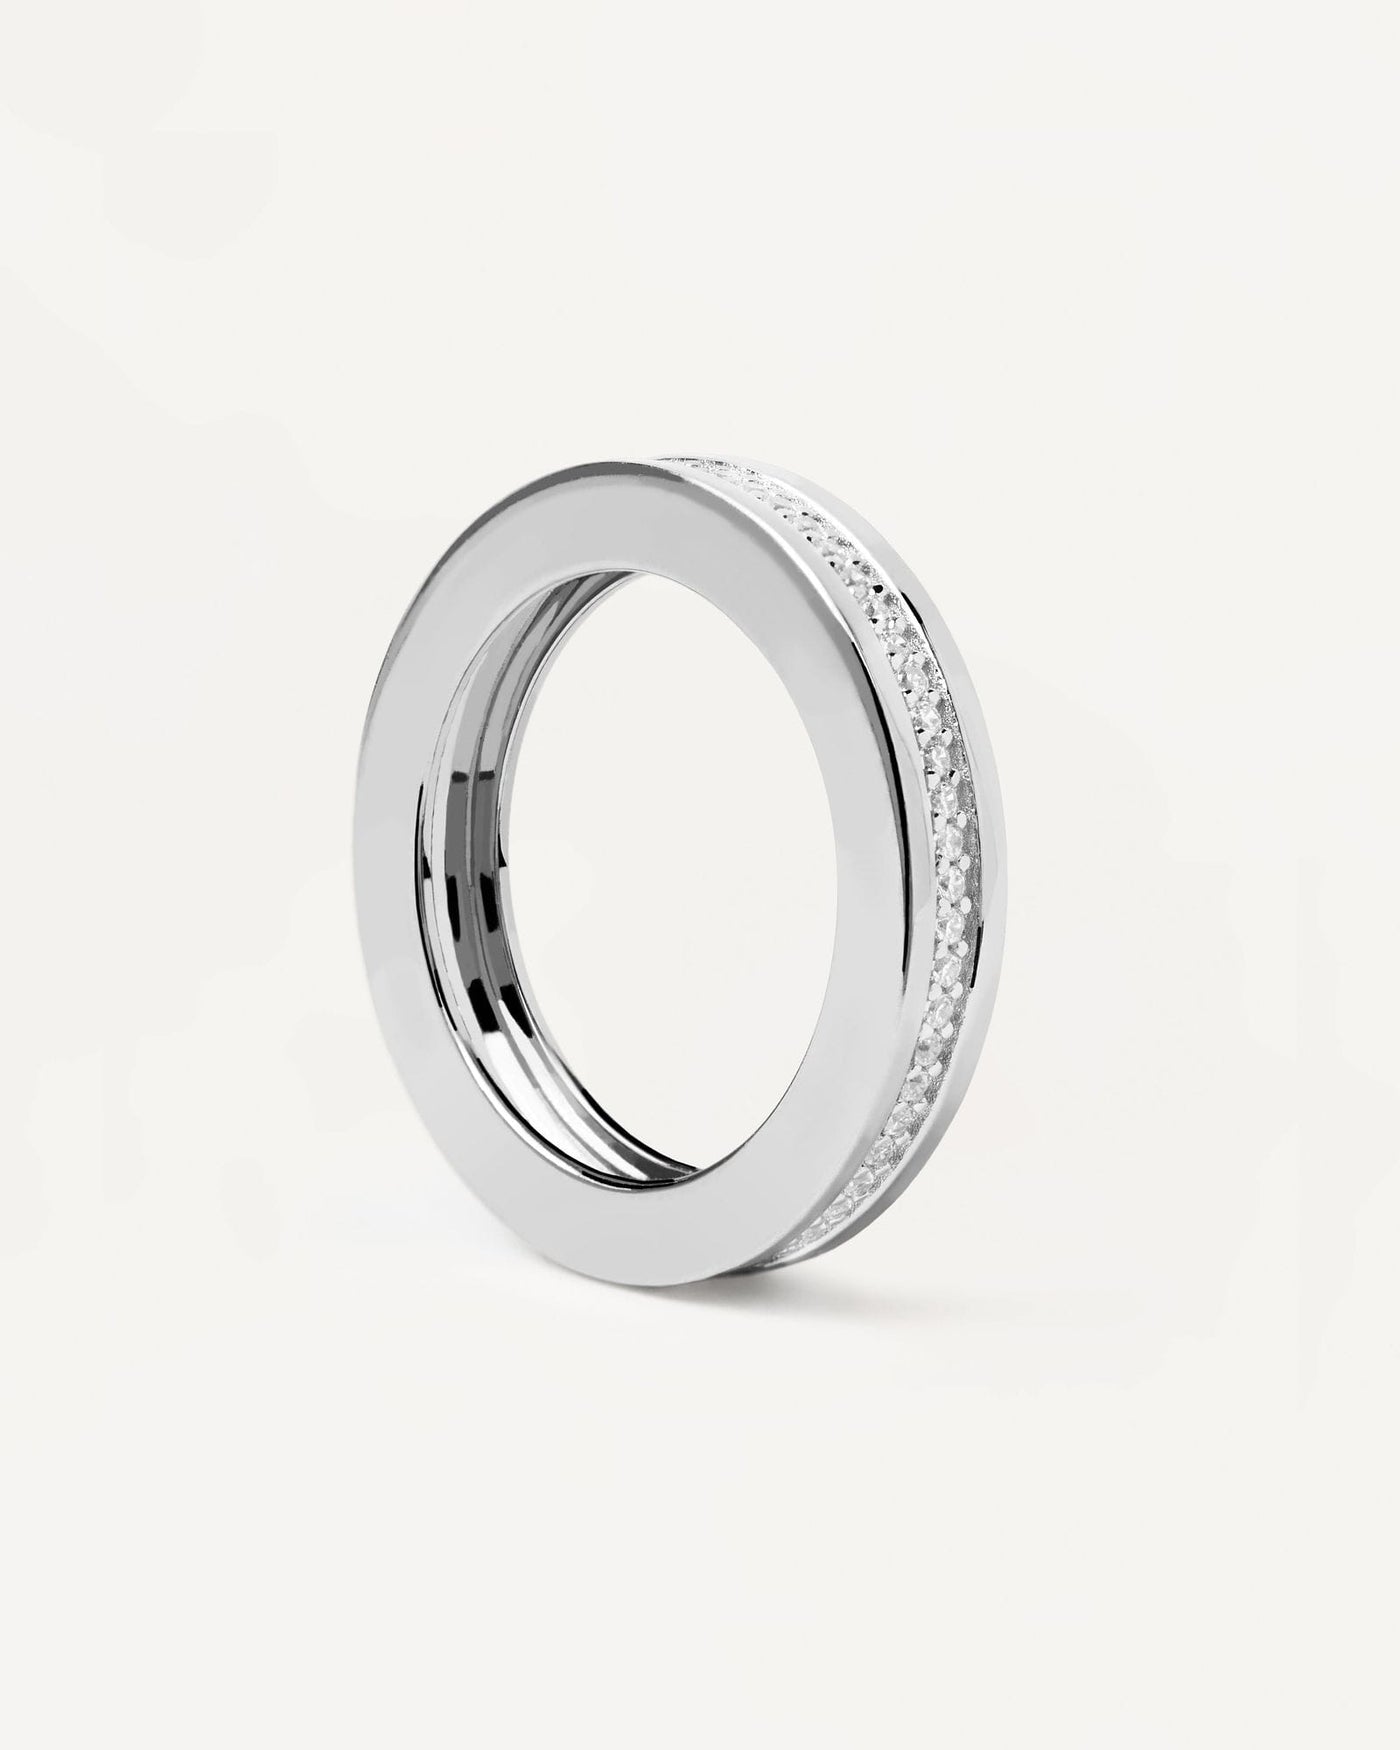 2024 Selection | Infinity Silver Ring. Sterling silver eternity ring in disc shape. Get the latest arrival from PDPAOLA. Place your order safely and get this Best Seller. Free Shipping.